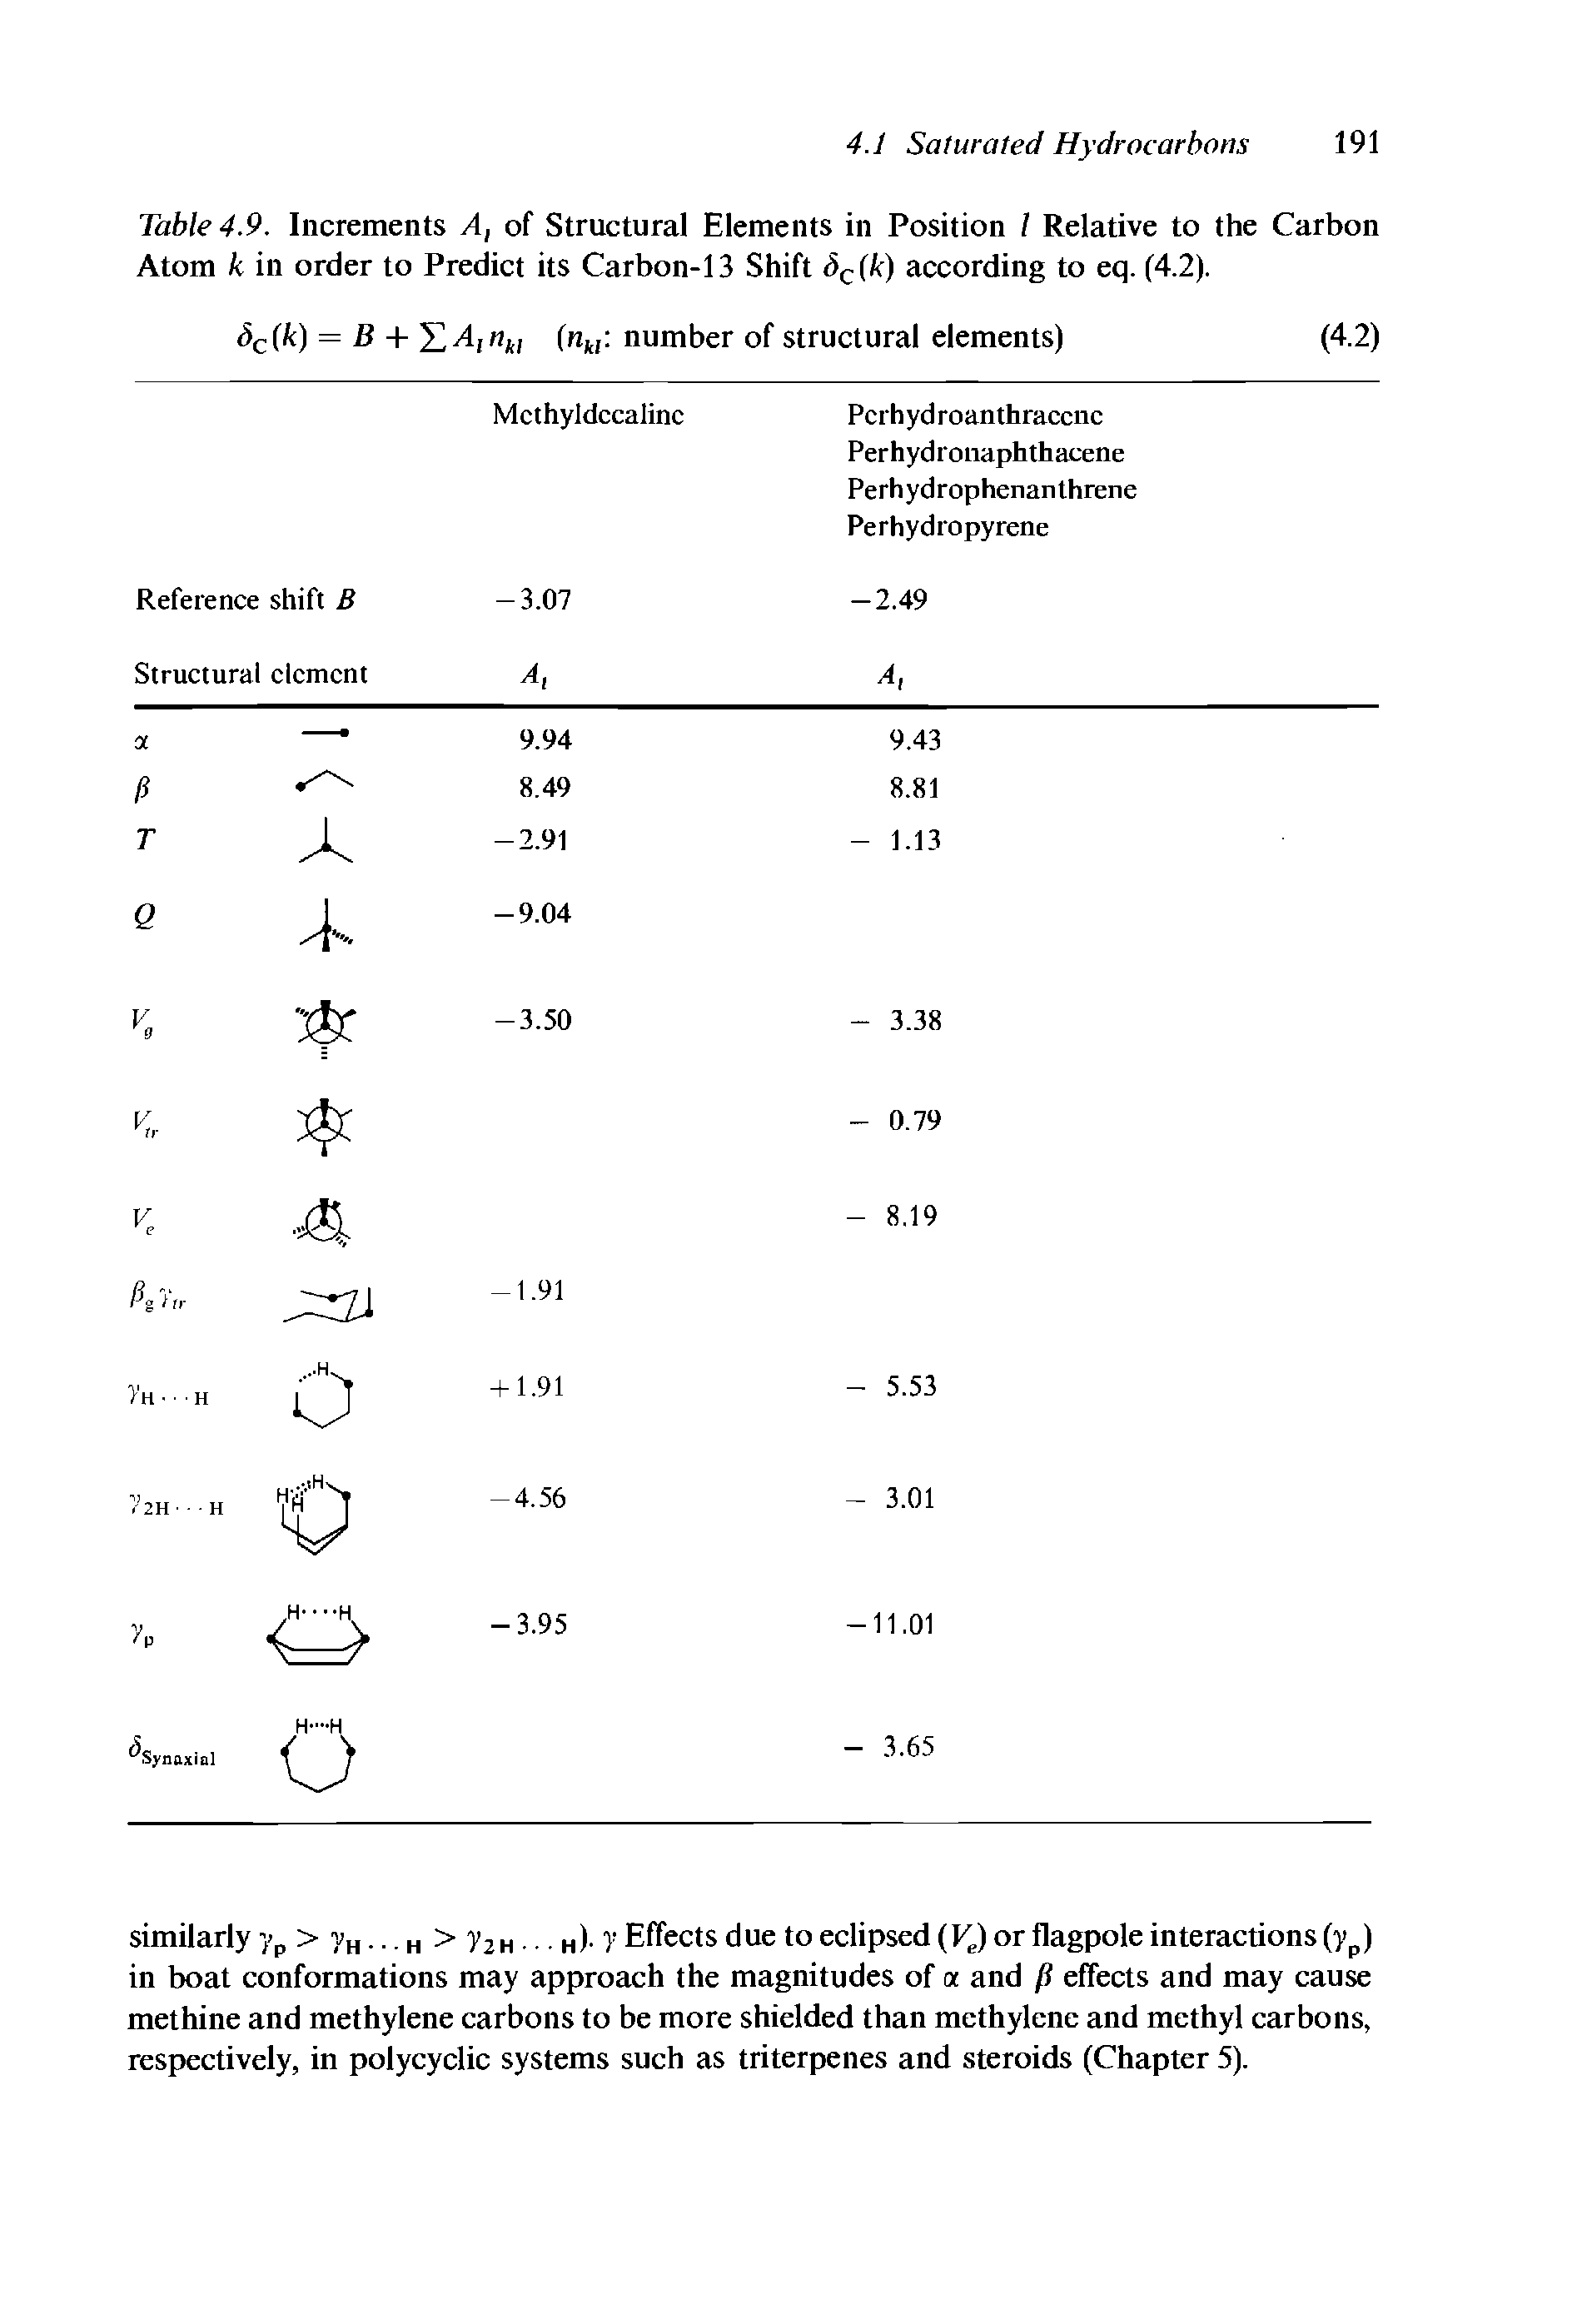 Table 4.9. Increments A, of Structural Elements in Position l Relative to the Carbon Atom k in order to Predict its Carbon-13 Shift Sc(k) according to eq. (4.2).